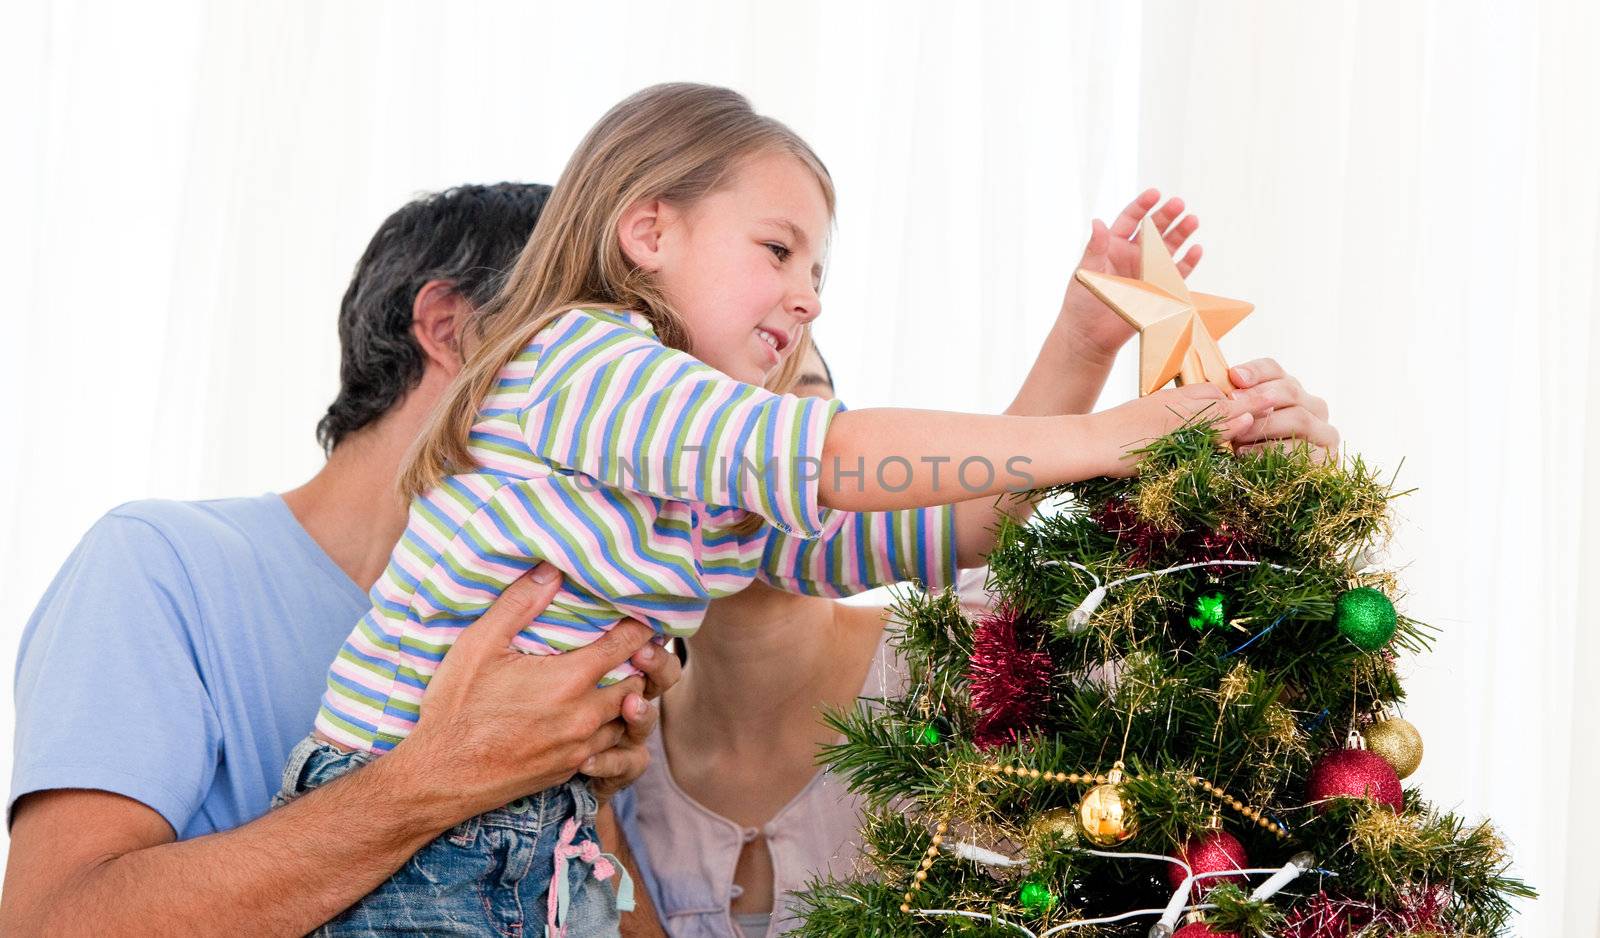 Little girl placing a star in a Christmas tree with her parents